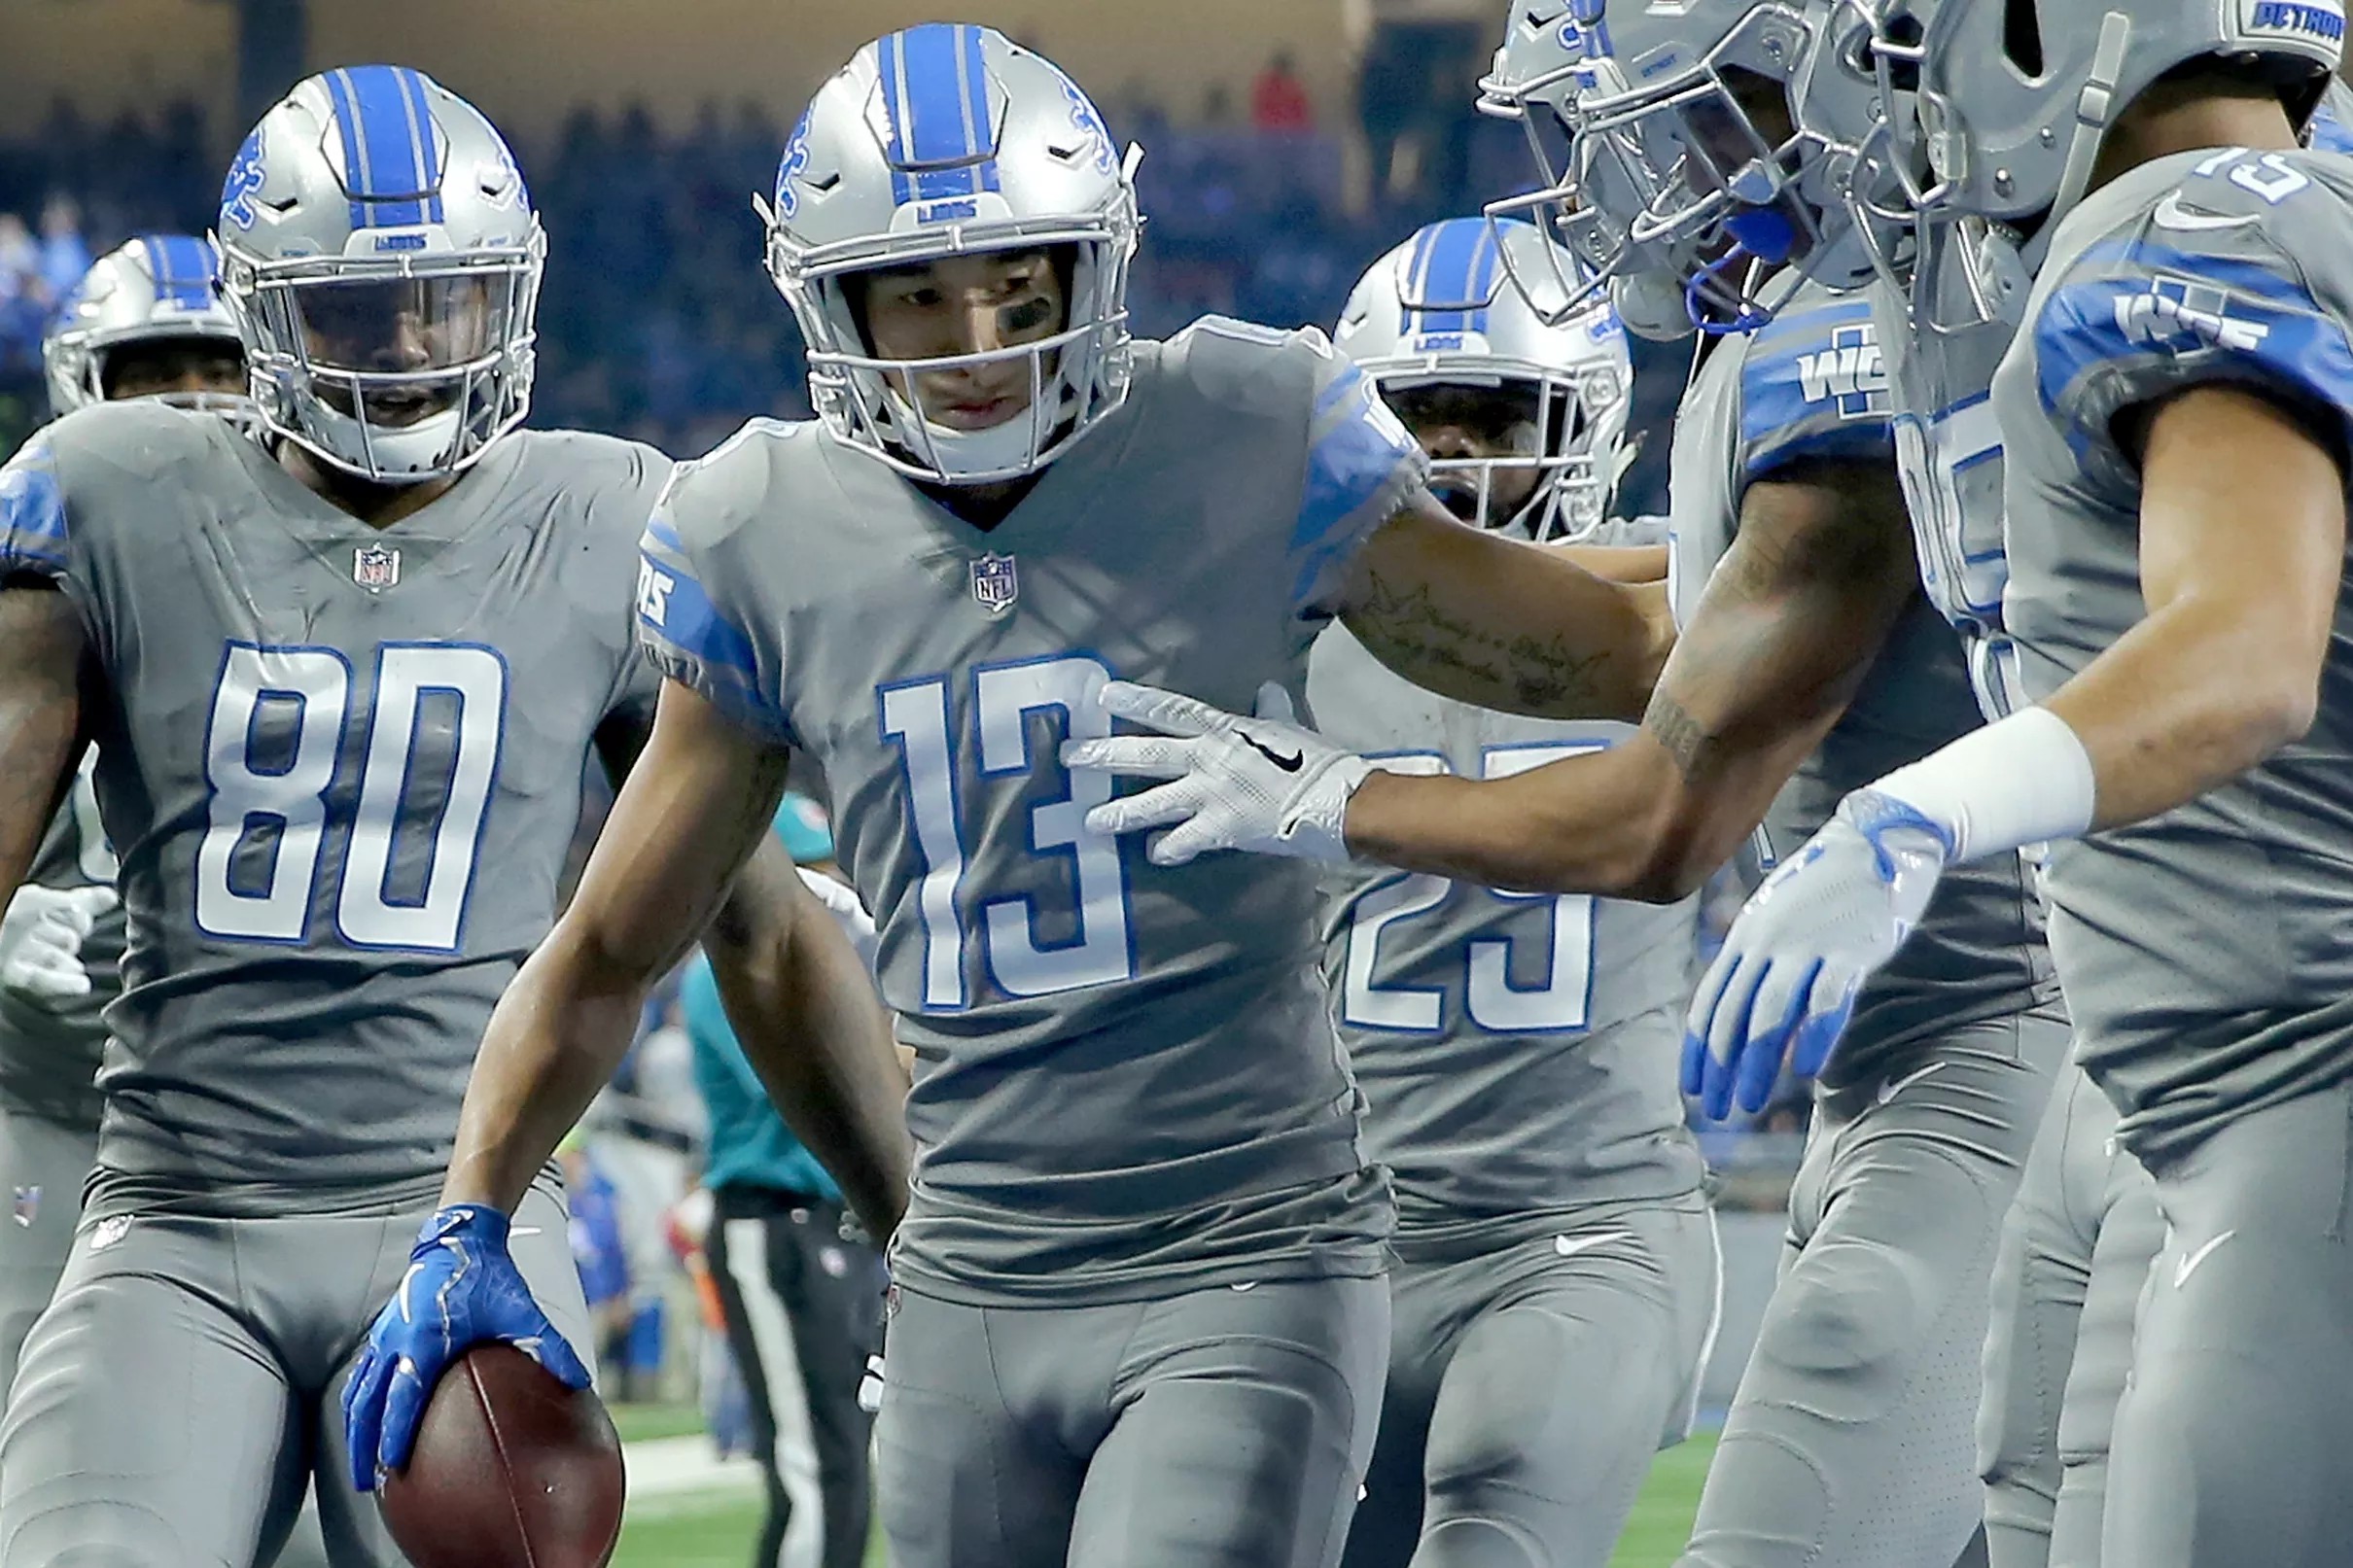 Lions place TJ Jones on injured reserve, sign WR Andy Jones to active roster